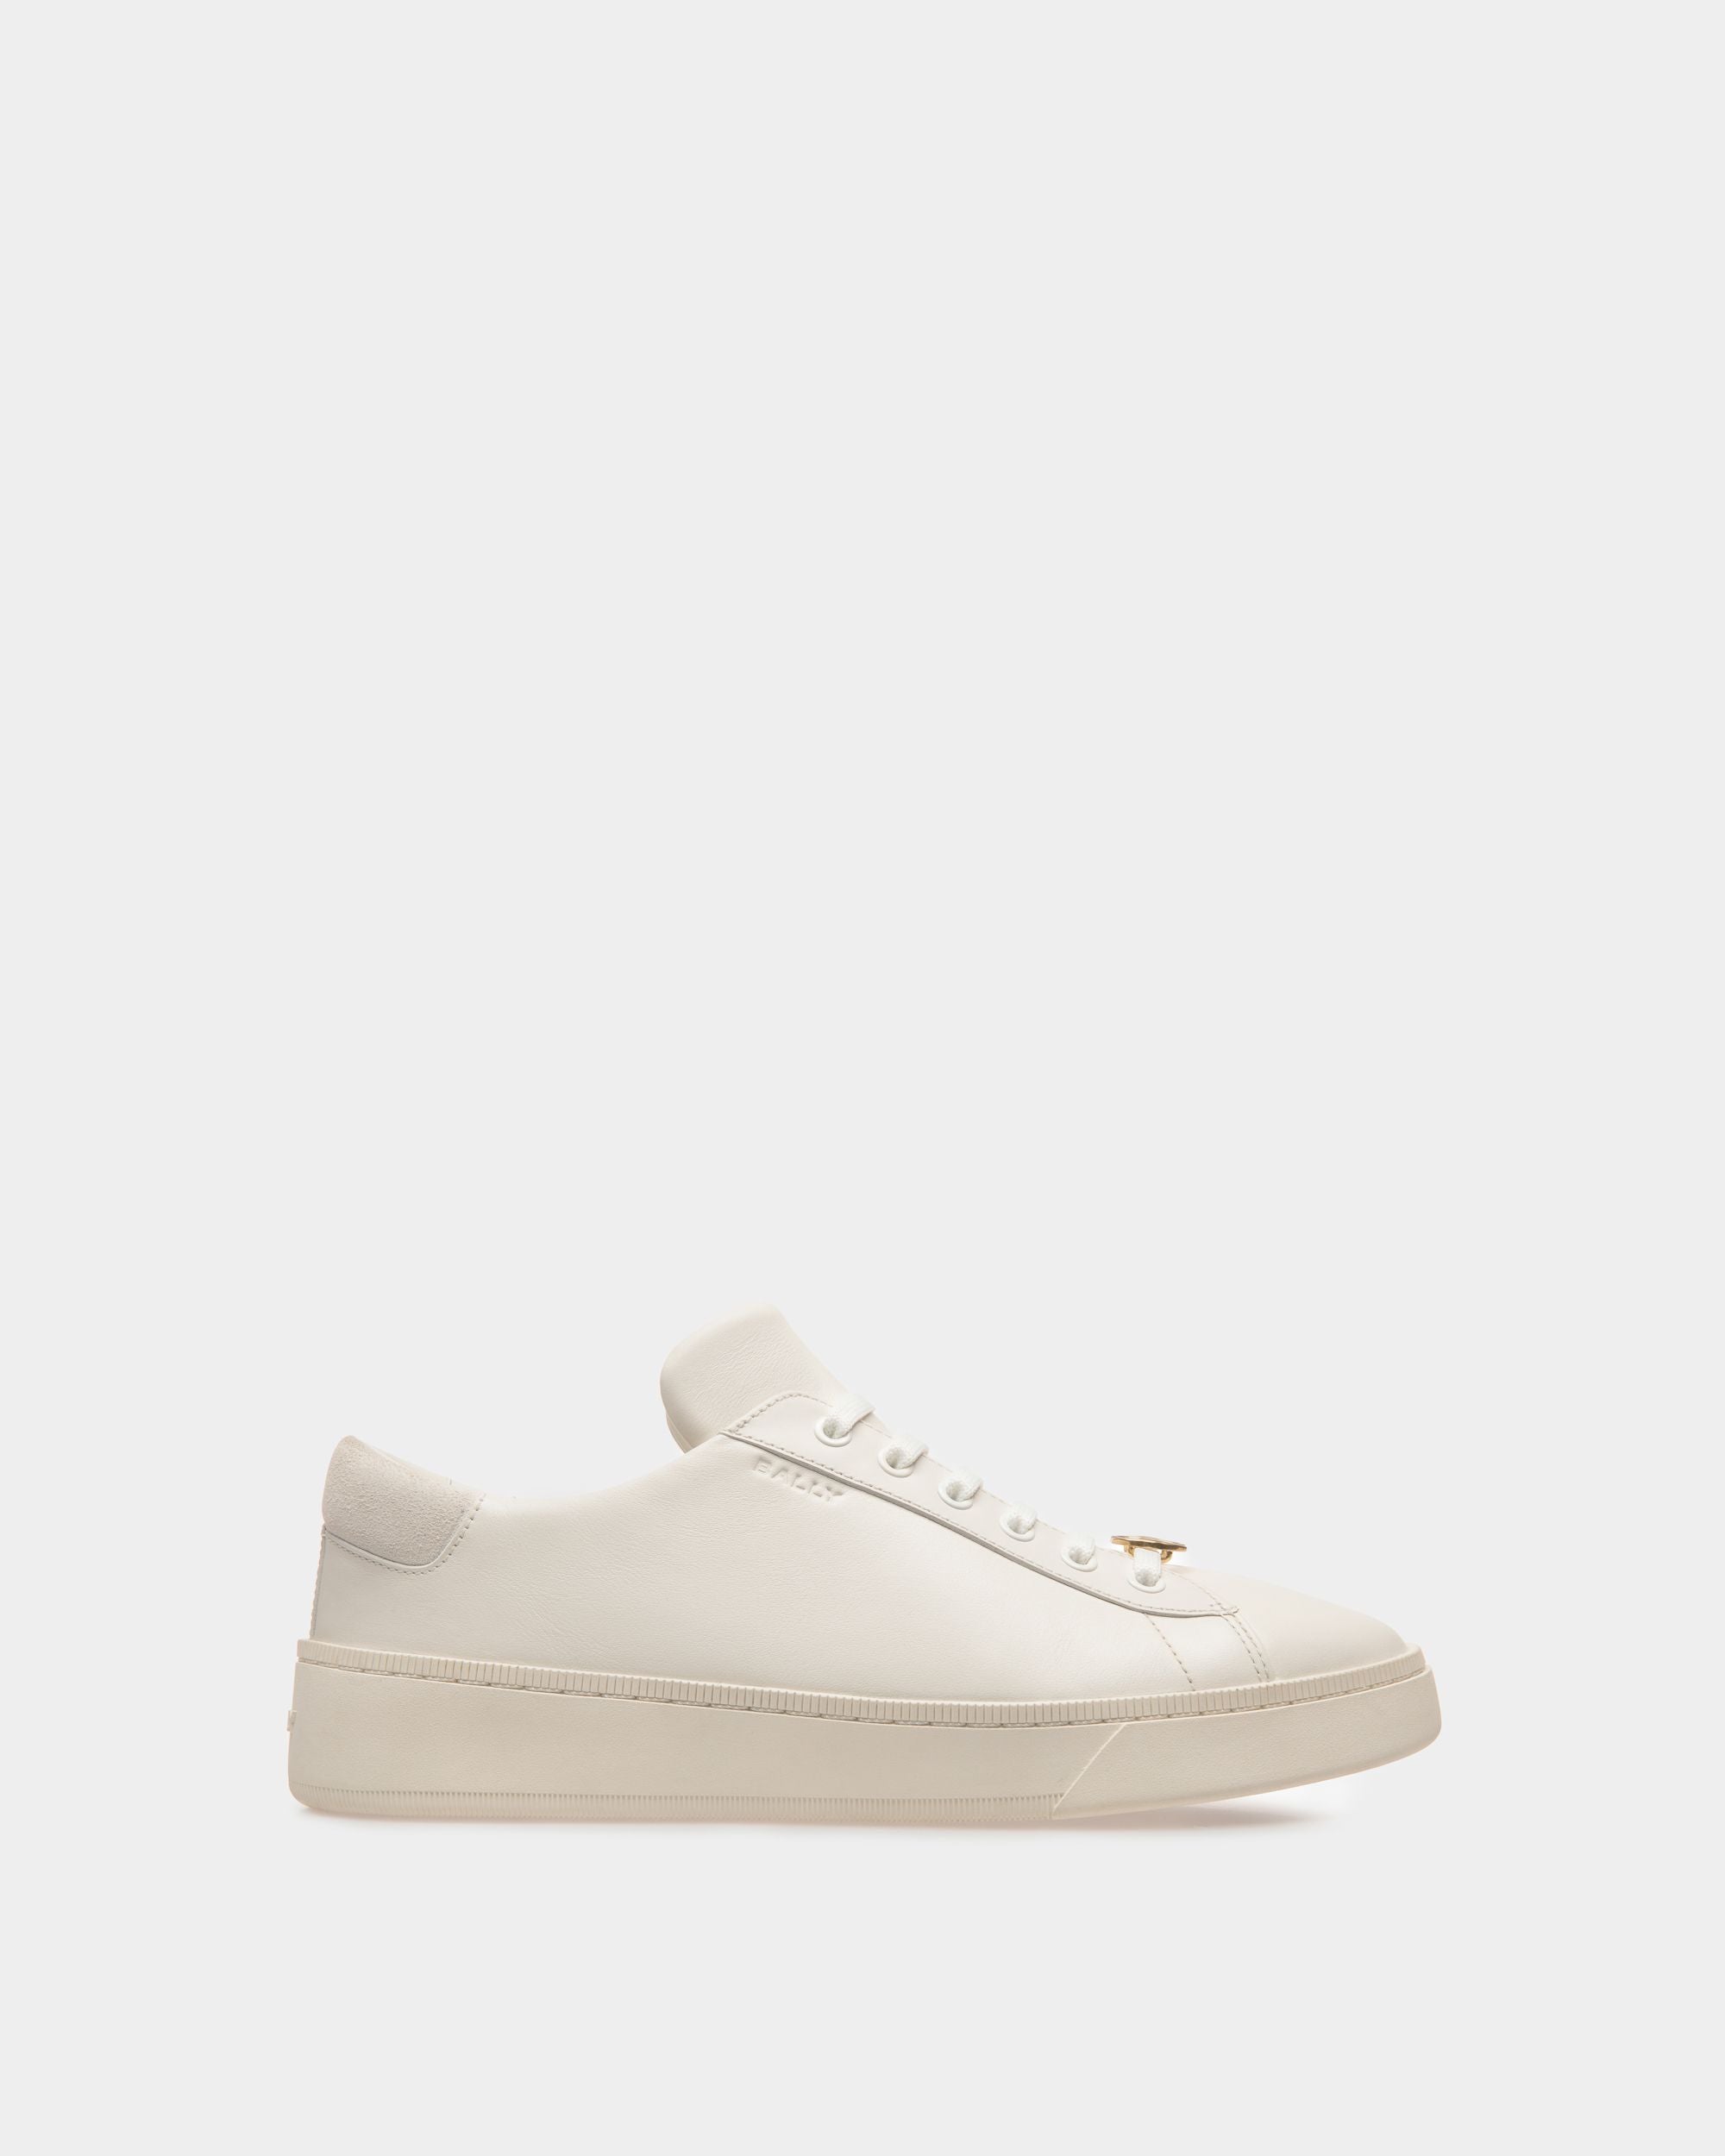 Ryver | Men's Sneakers | White Leather | Bally | Still Life Side